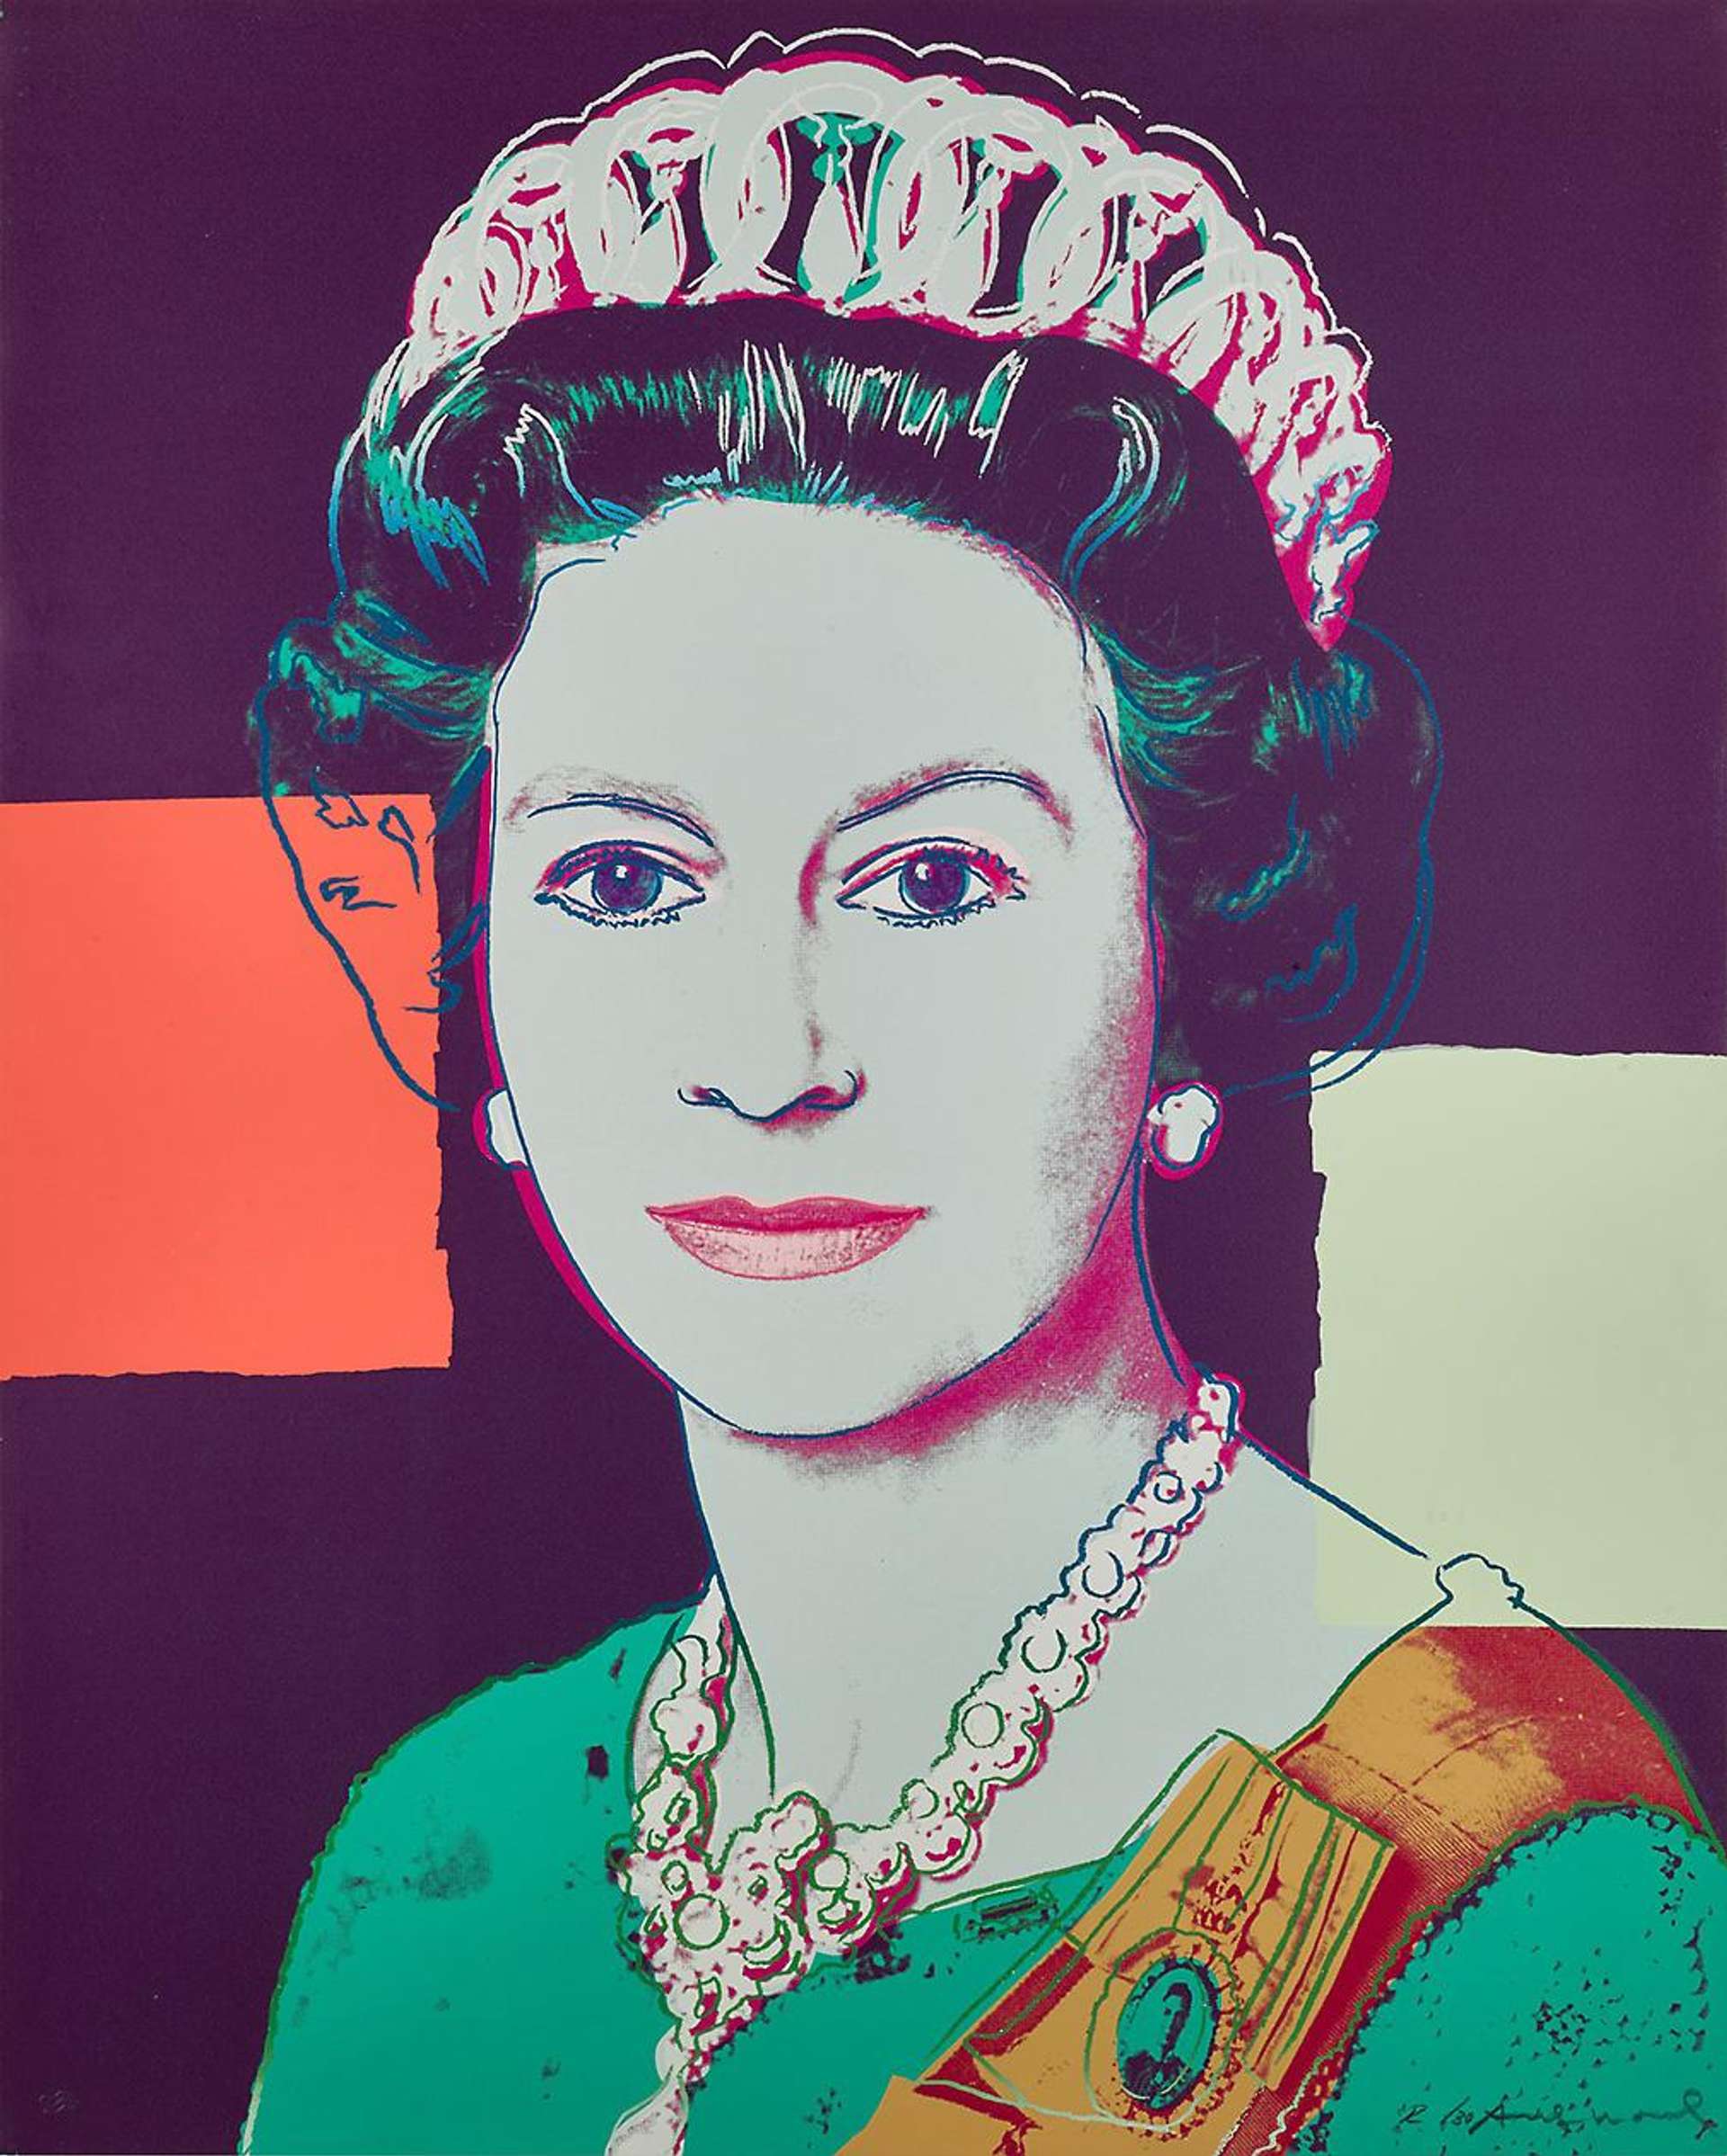 A screenprint by Andy Warhol depicting Queen Elizabeth II of England against a purple background, with collaged squares in red and off-white. The image of the Queen is executed in unnatural colours, with glitter covering the entire composition